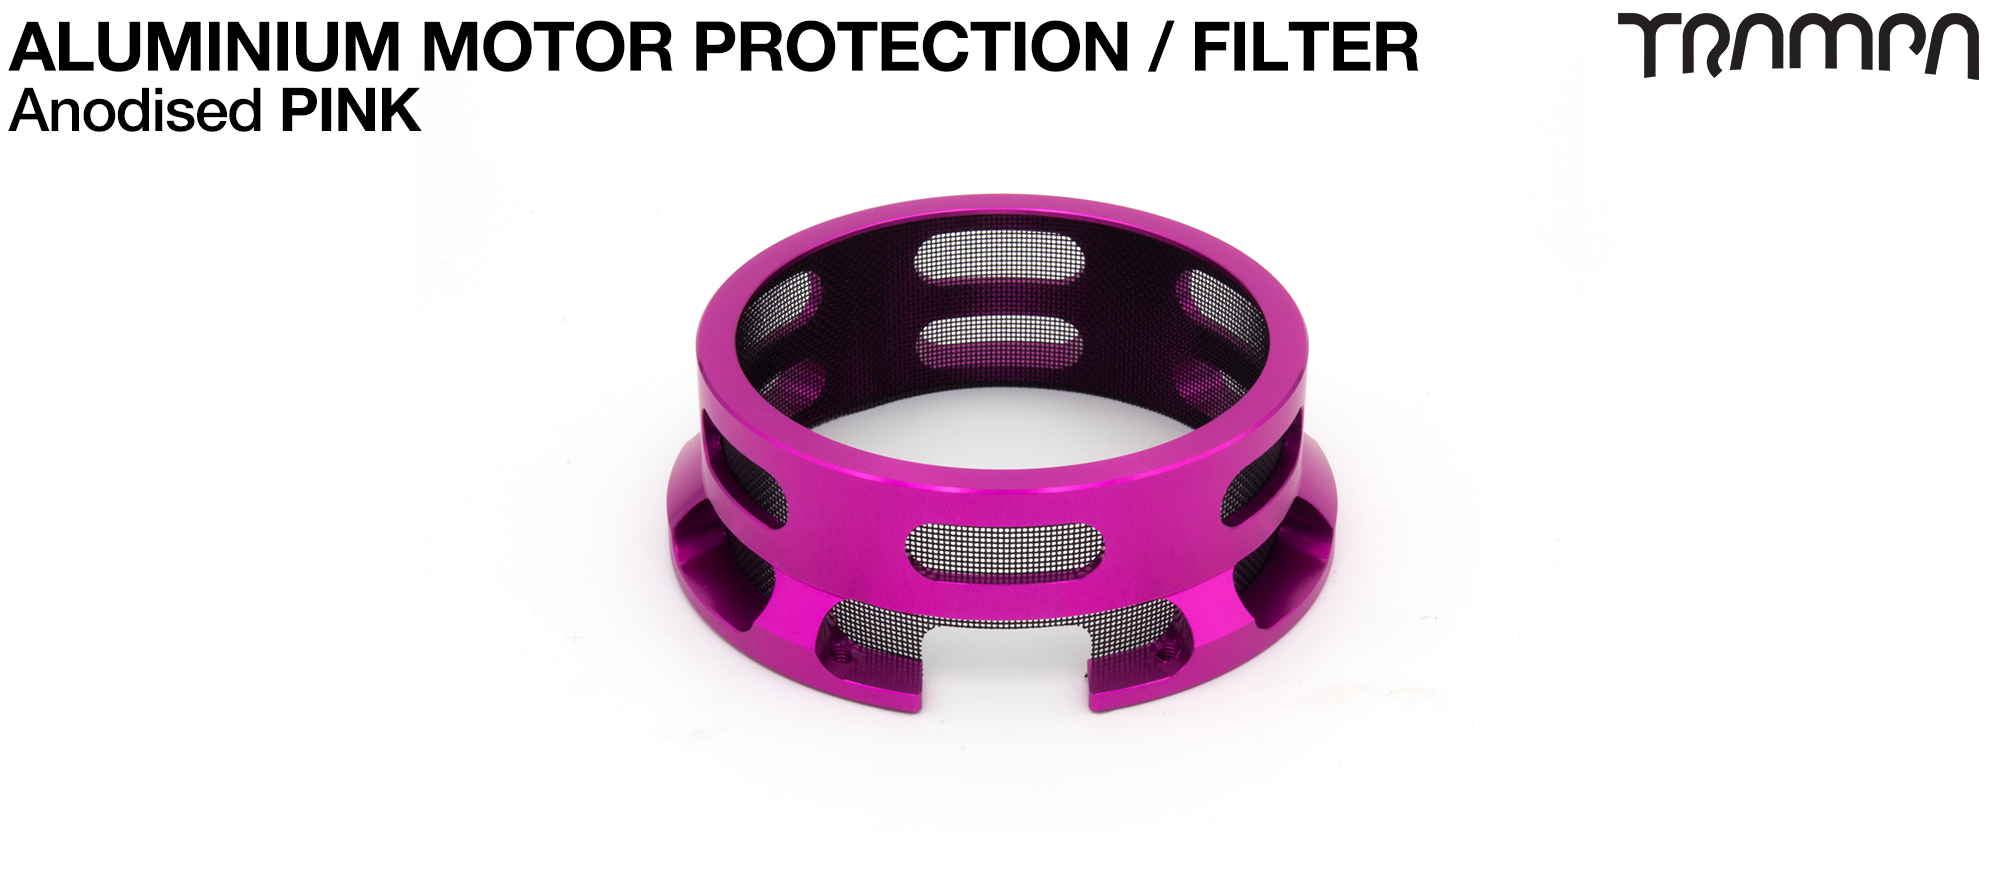 HALF CAGE Motor protection Housing - PINK 